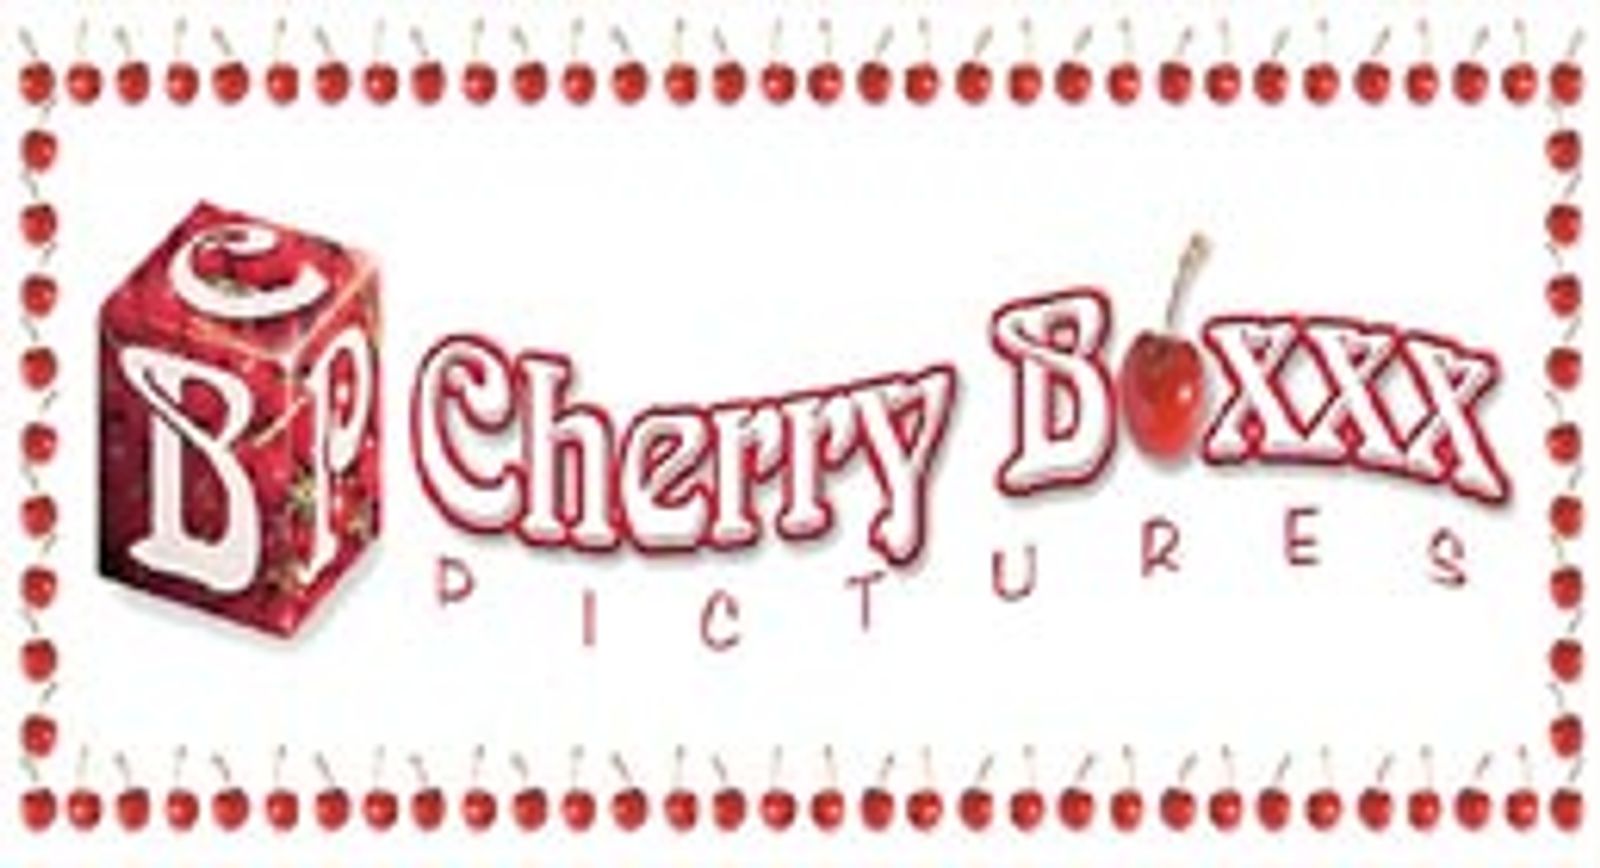 Beechum and Gold Form Cherry Boxxx Pictures